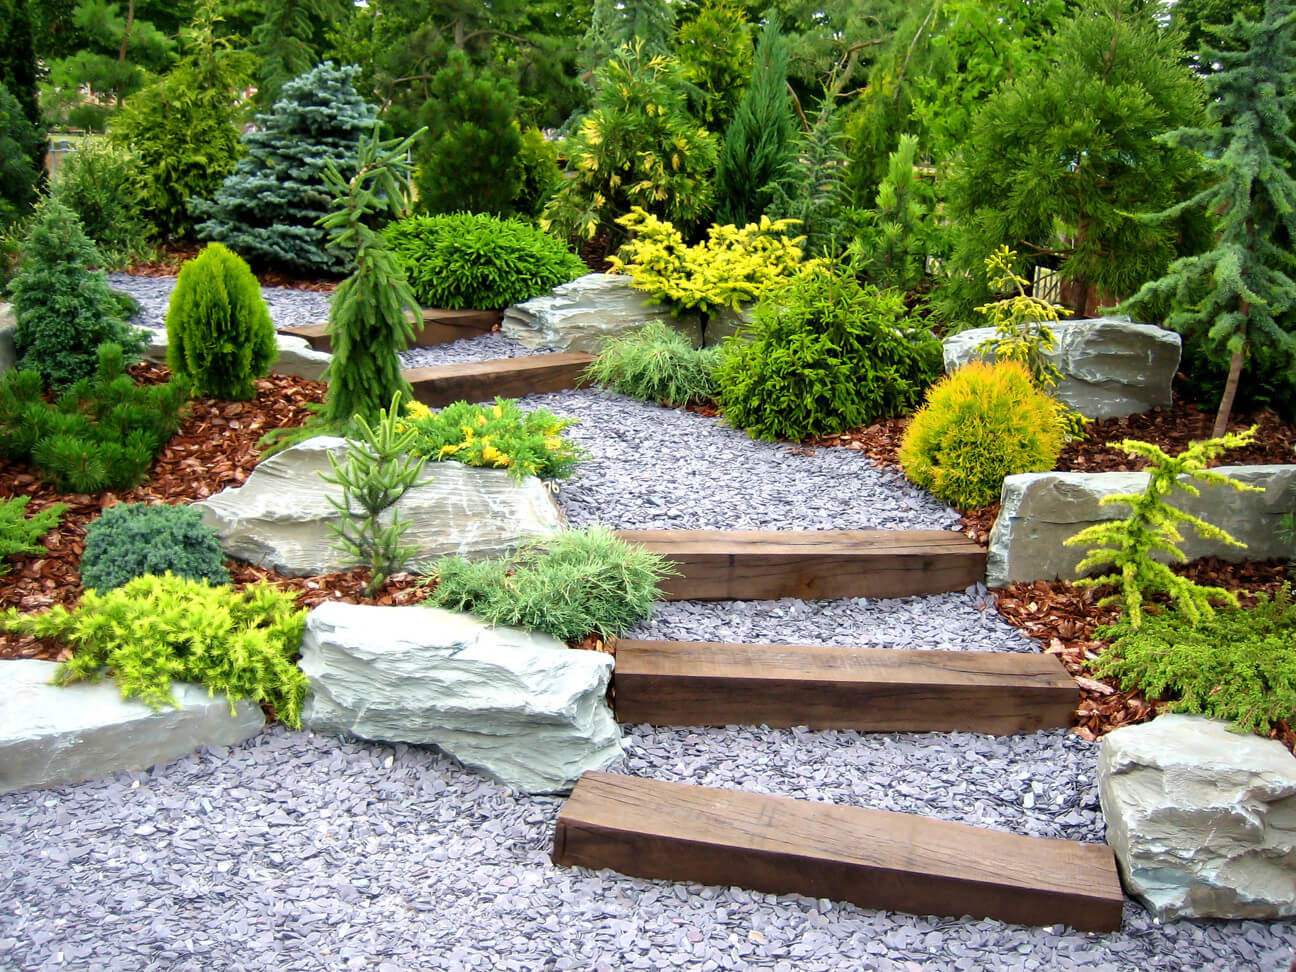 Landscape design | Six Mistakes to Avoid When Landscaping